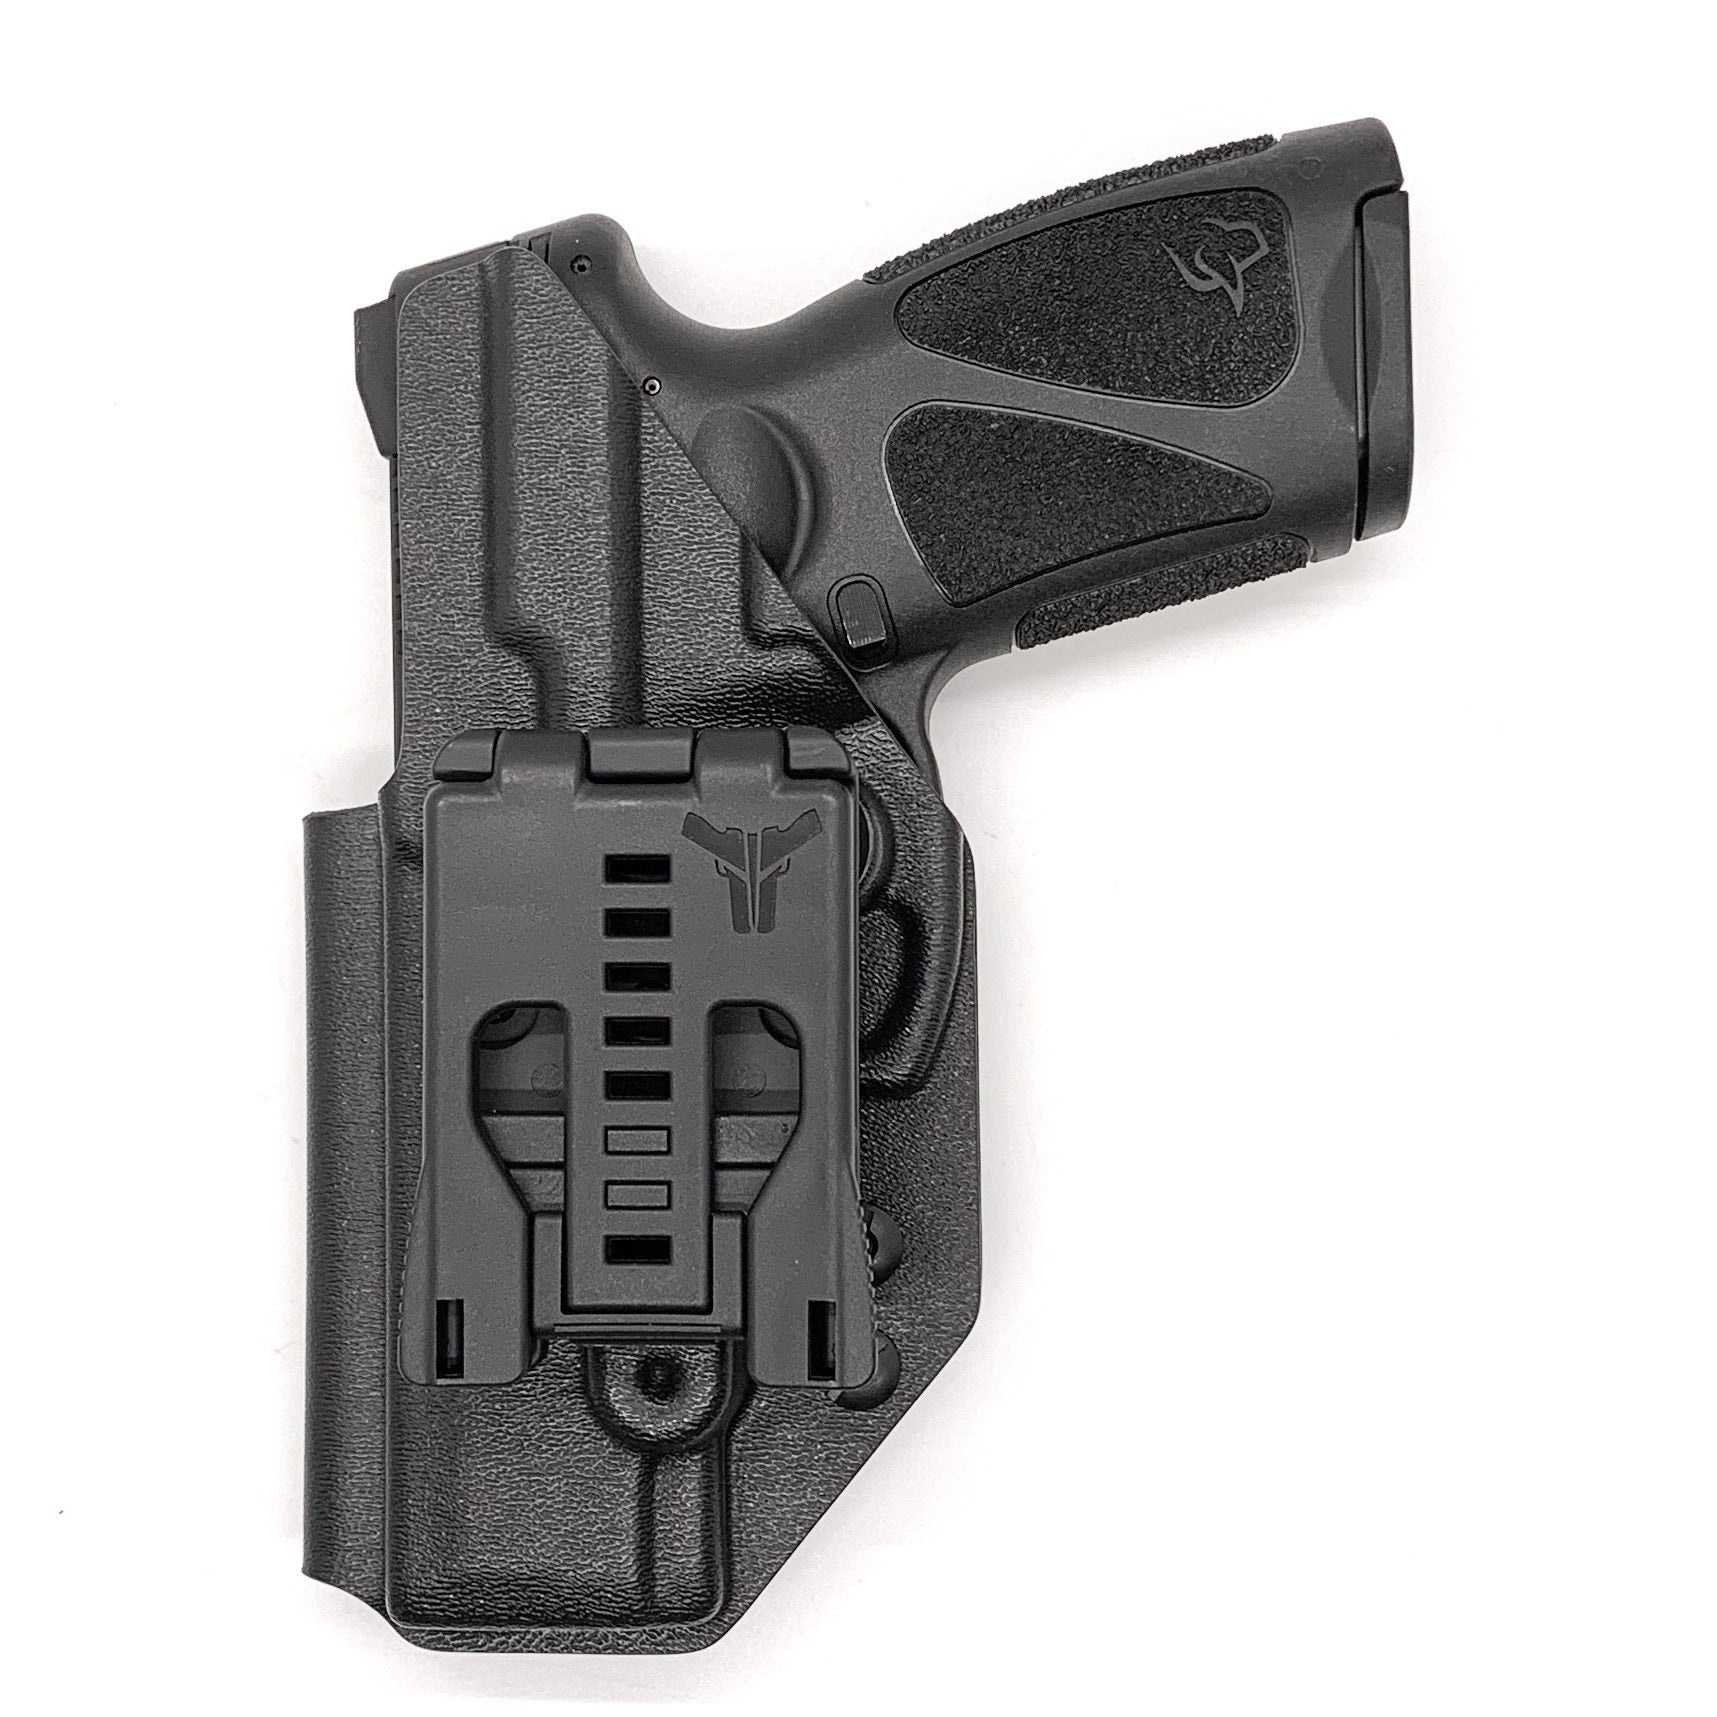 For the best, most comfortable, OWB, Kydex Outside Waistband Holster Designed to fit the Taurus G3 pistol, shop Four Brothers 4BROS holsters. Adjustable retention, high sweat guard, smooth edges, and minimal material for improved comfort and concealment. Made in the USA 